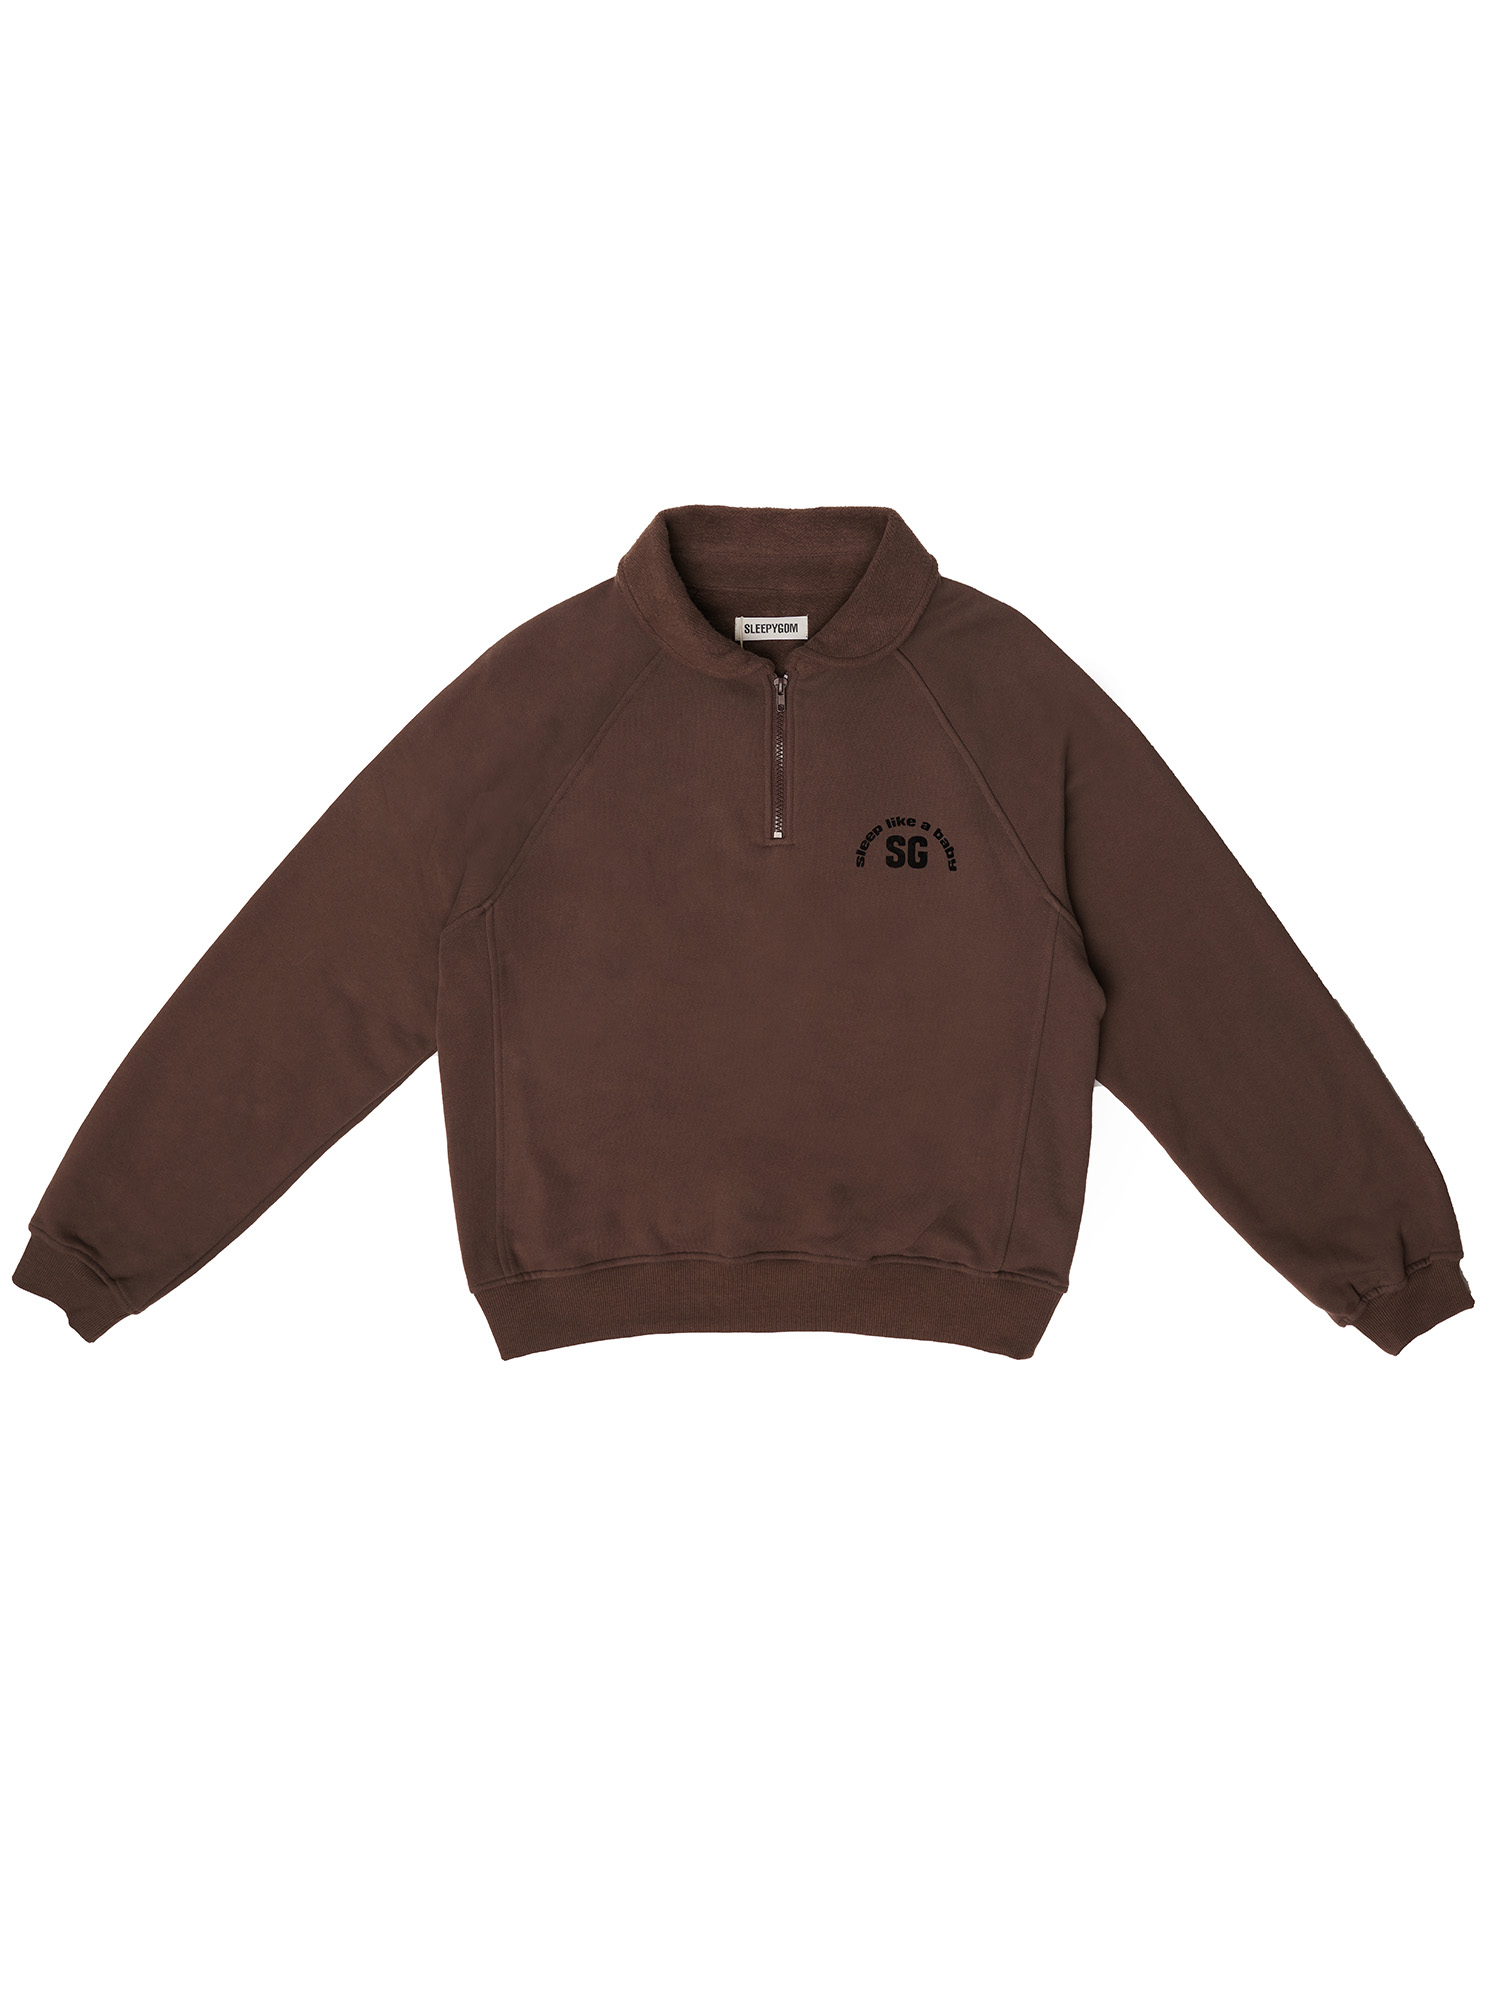 Holiday Brown Quater Zip -Brown